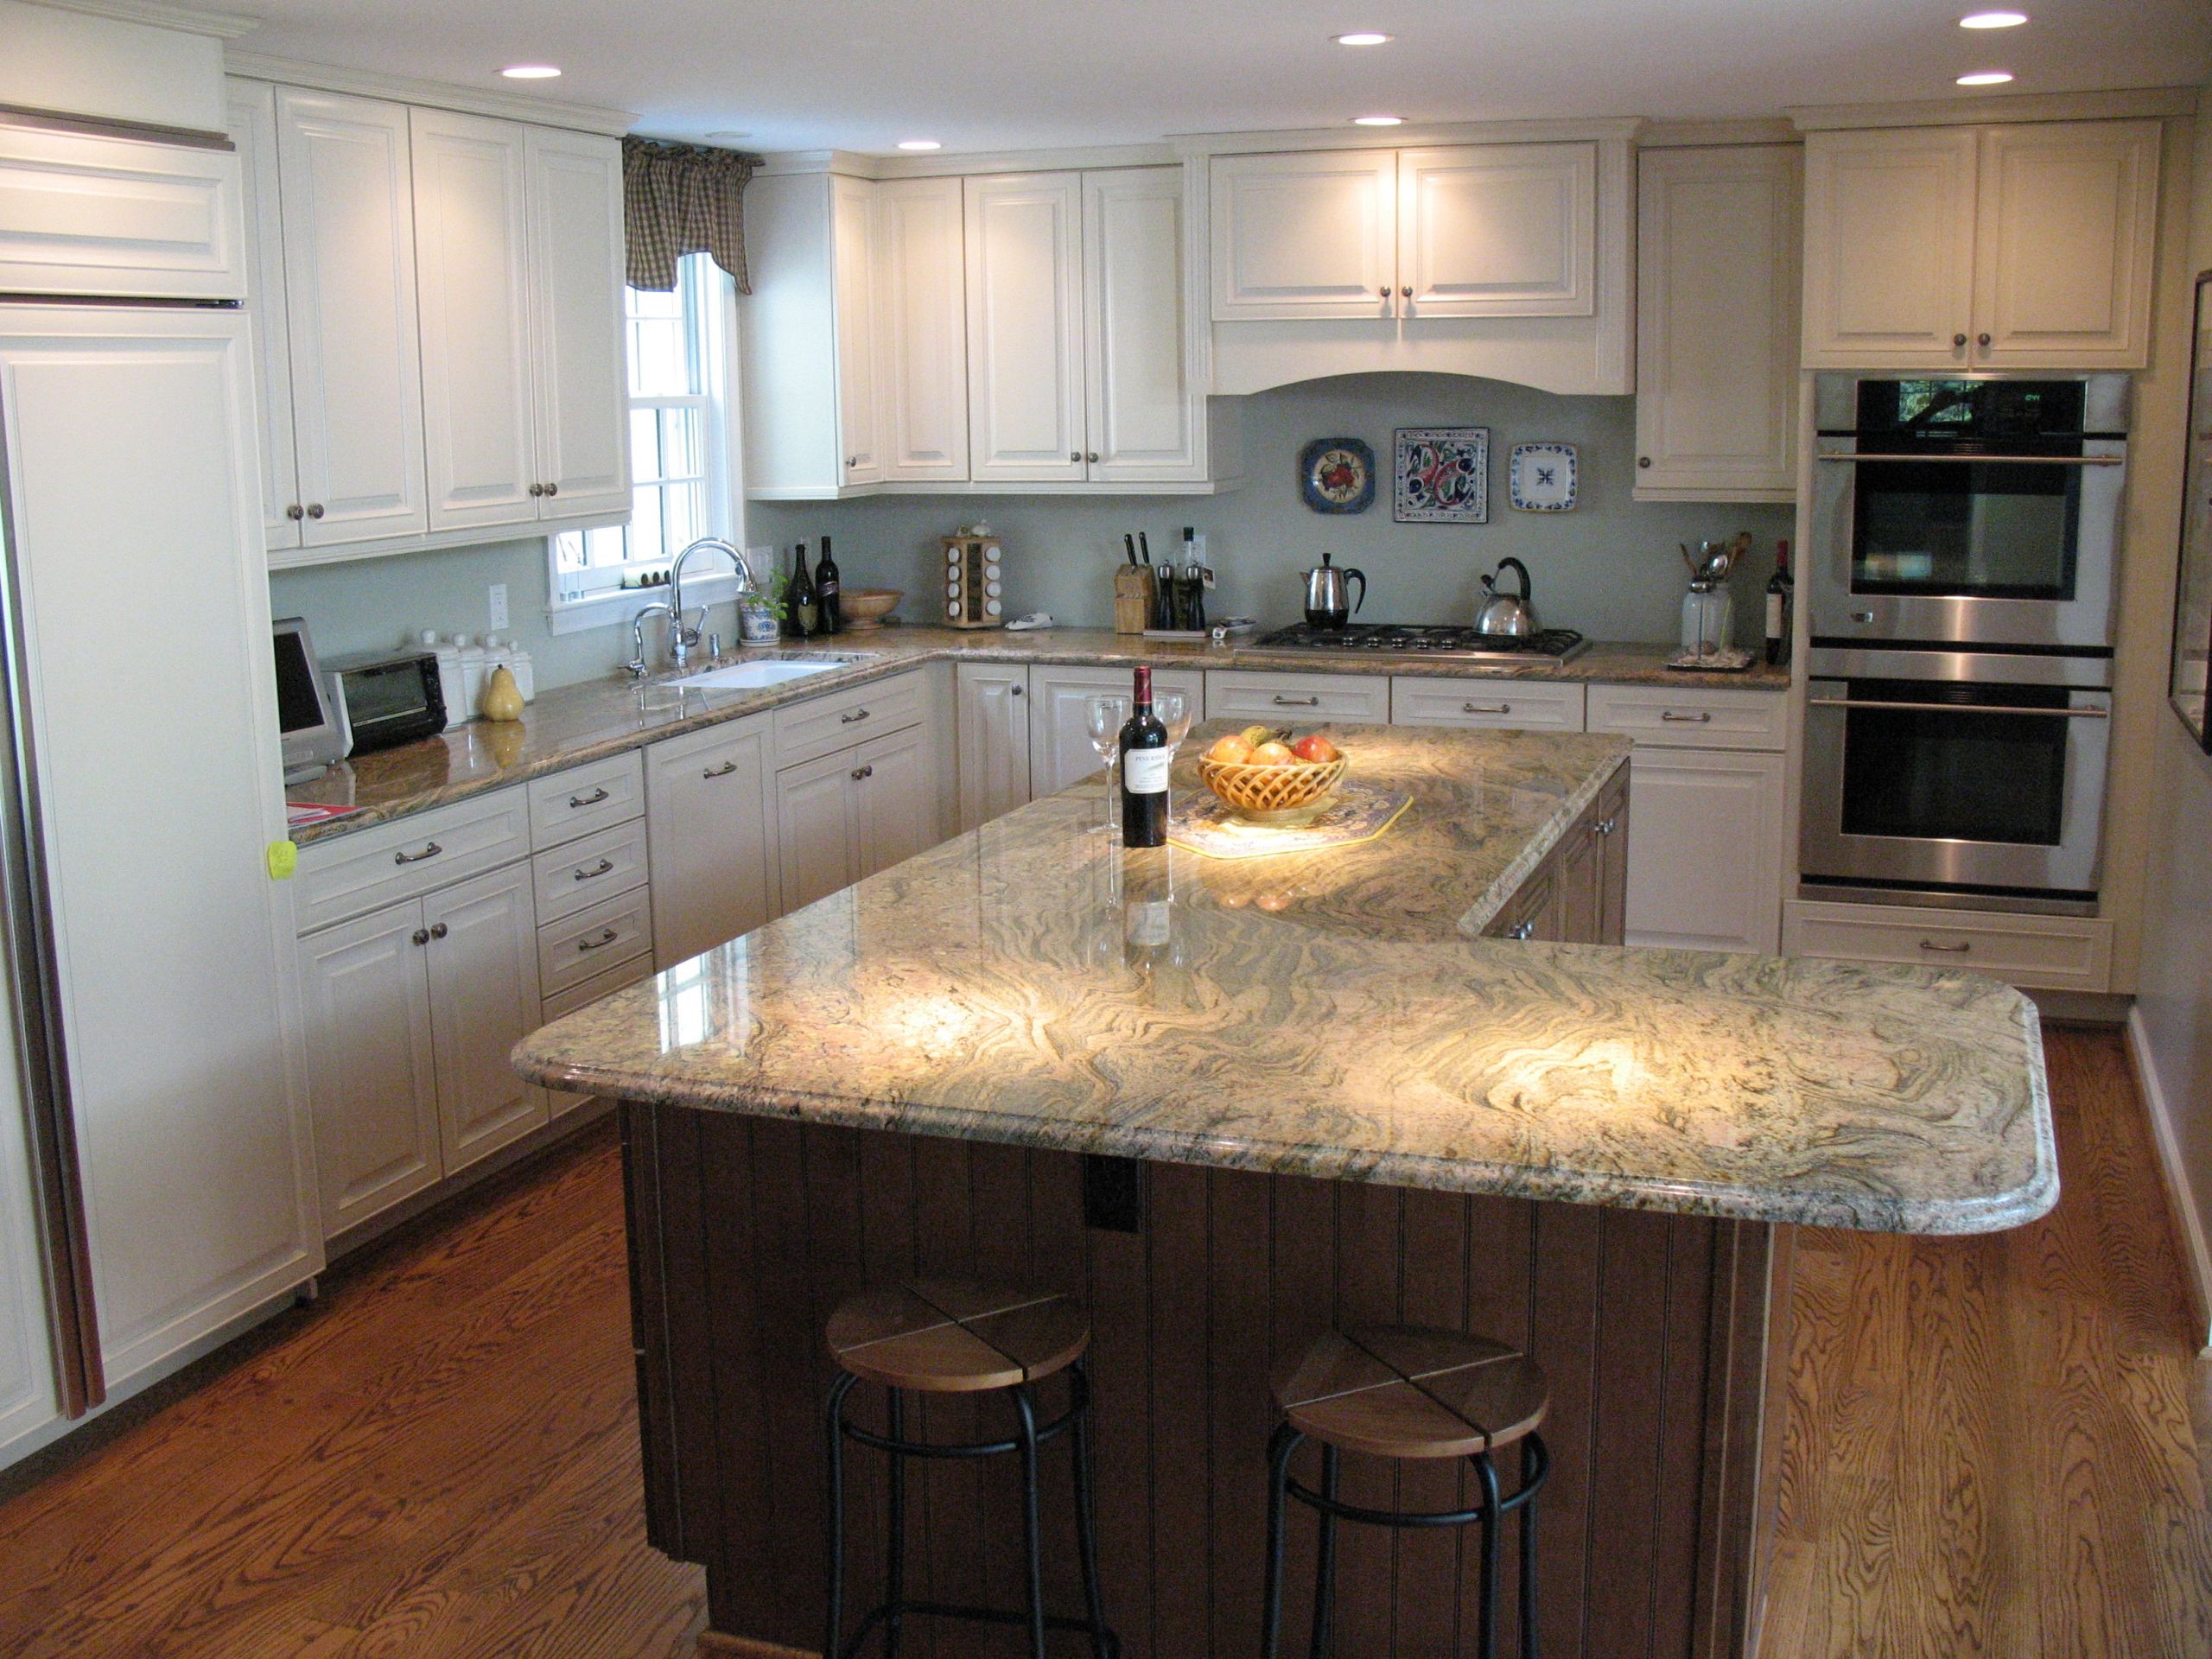 Kitchen Remodel Cost Estimator
 Kitchen Designs Remodel A Bud Hurry Inexpensive